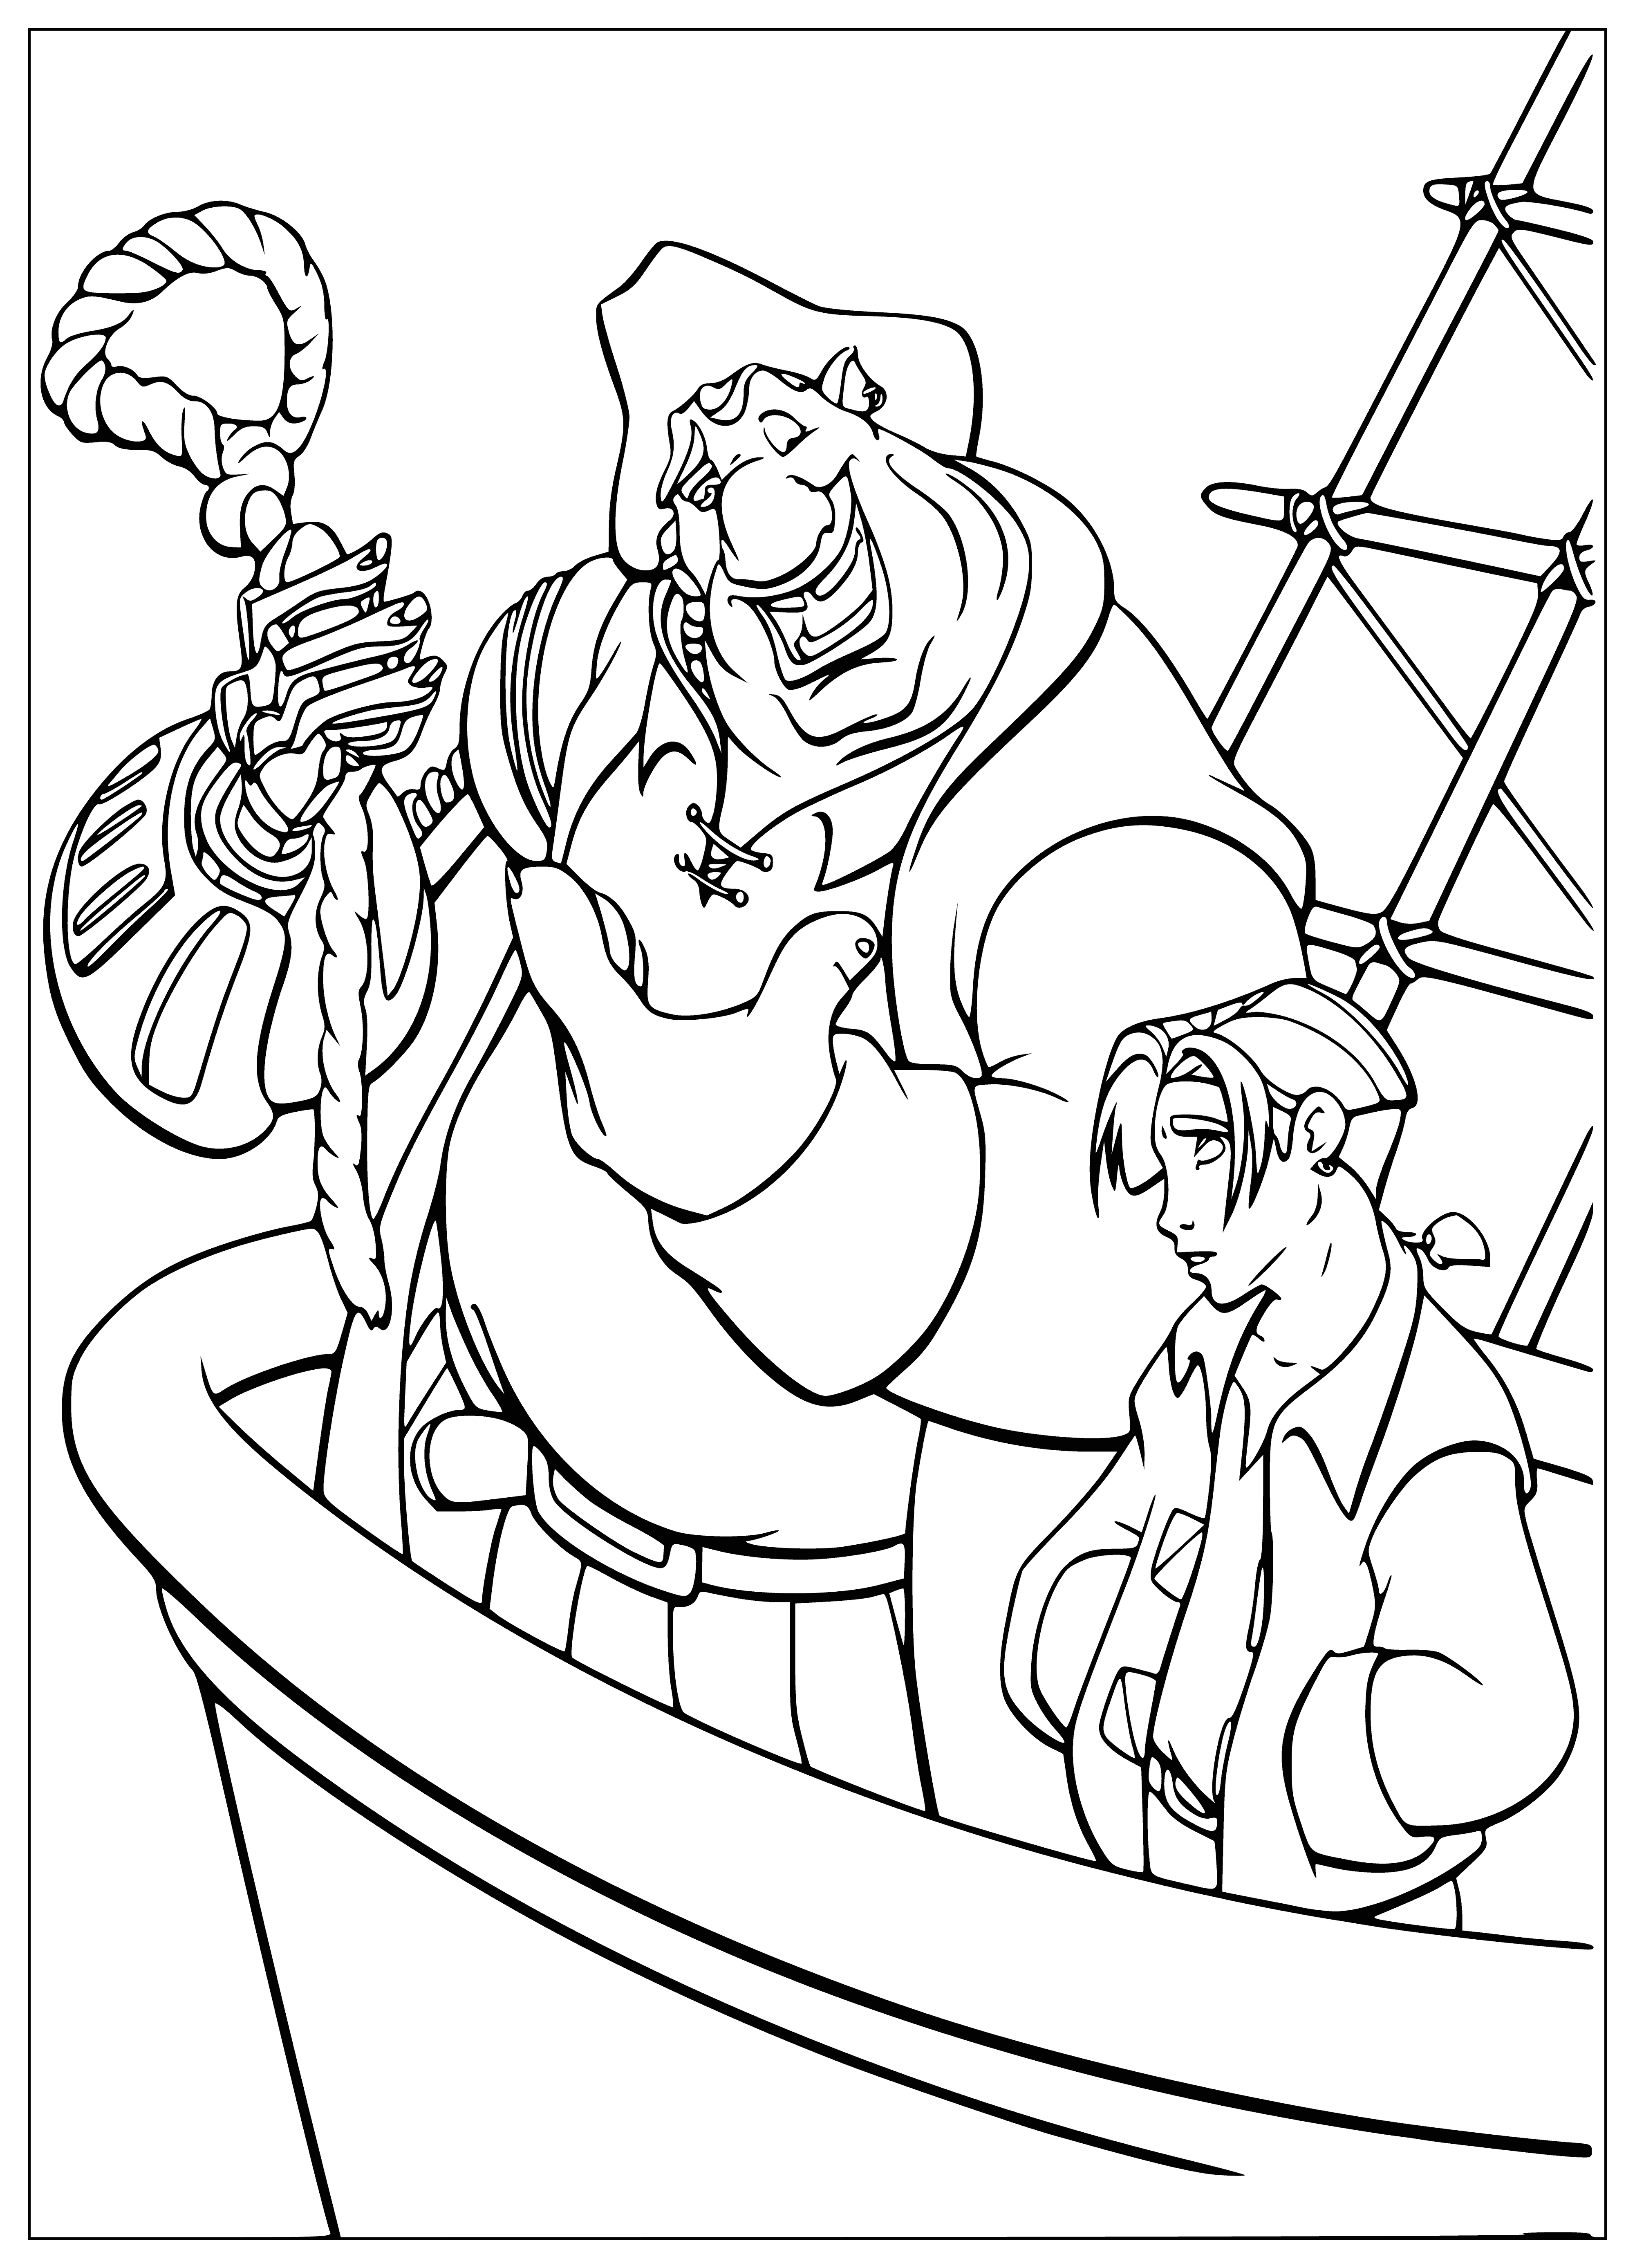 coloring page: Jim looks excited as he stares at the piece of silver Silver gave him. She stands proudly with a wooden box in her hand.